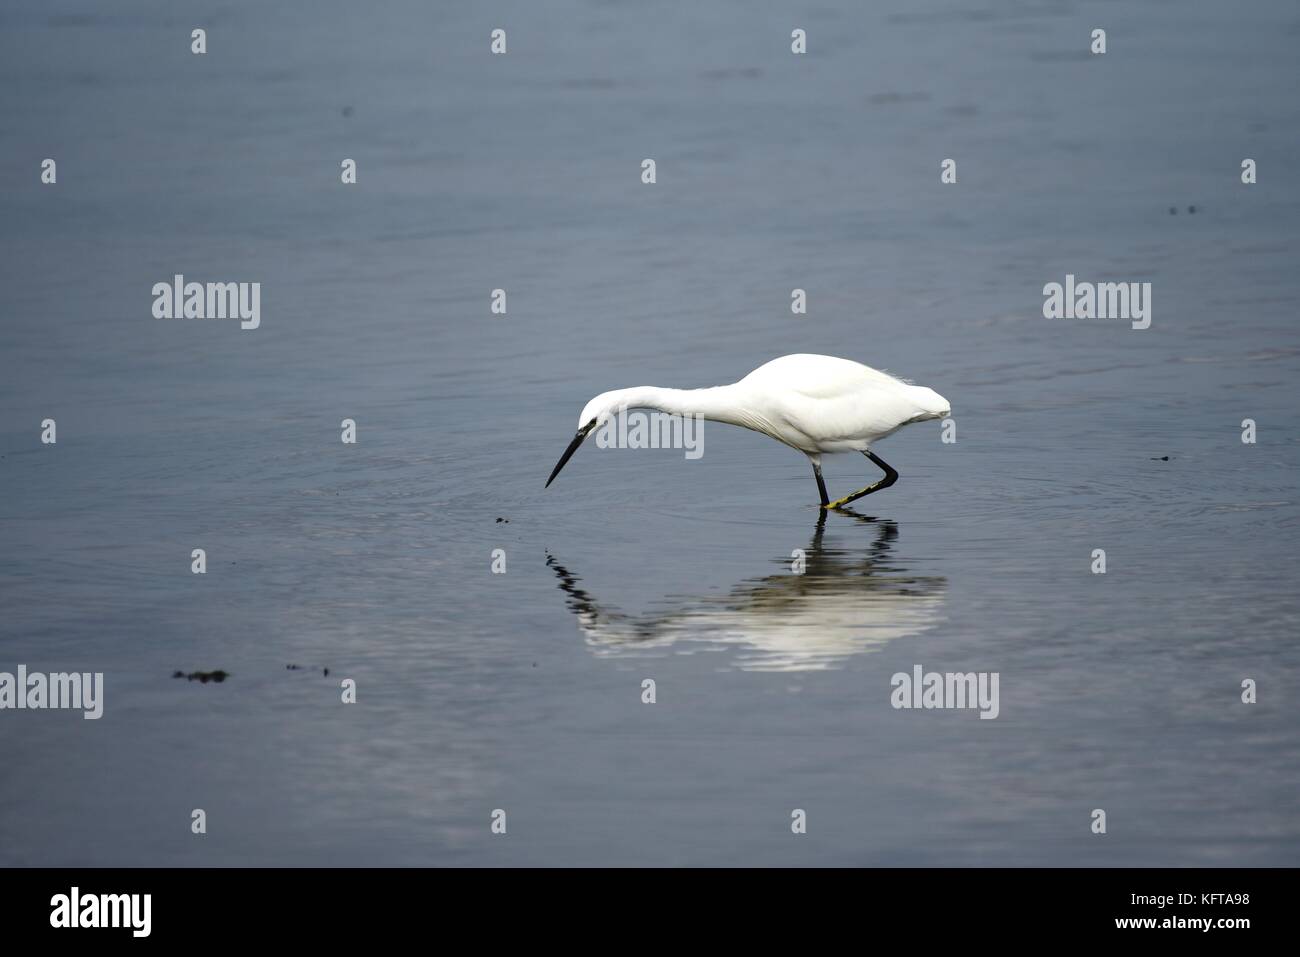 Little egret looking for shrimps and fish in shallow waters at Arne nature reserve Wareham, Dorset,UK. Stock Photo